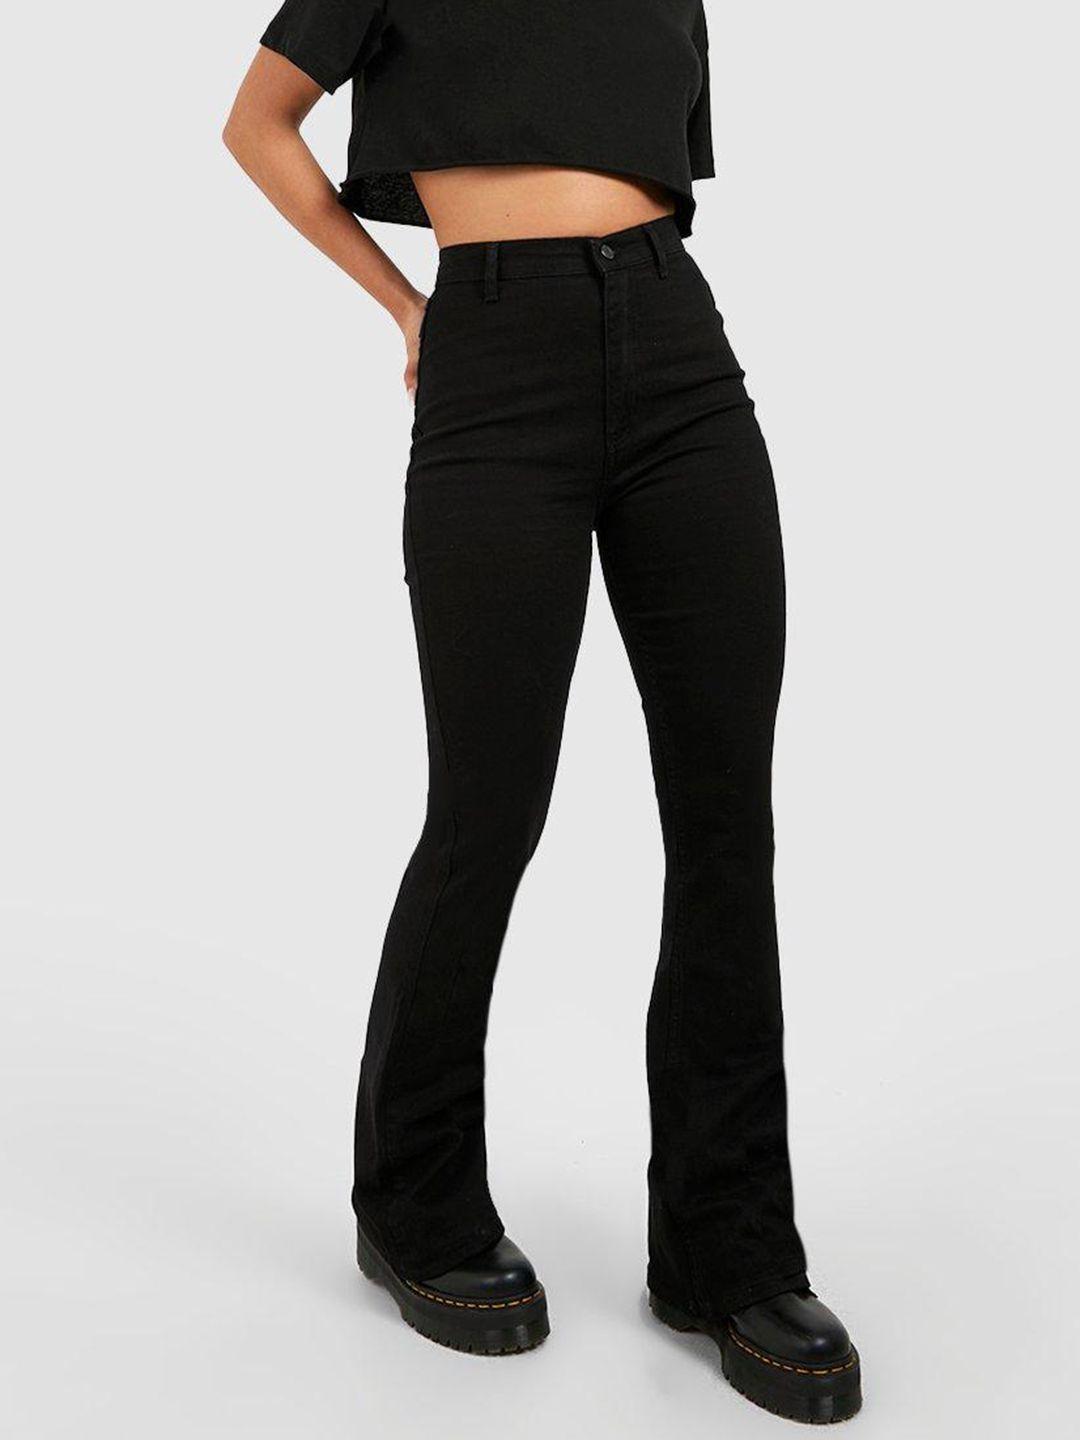 boohoo women skinny fit stretchable jeans